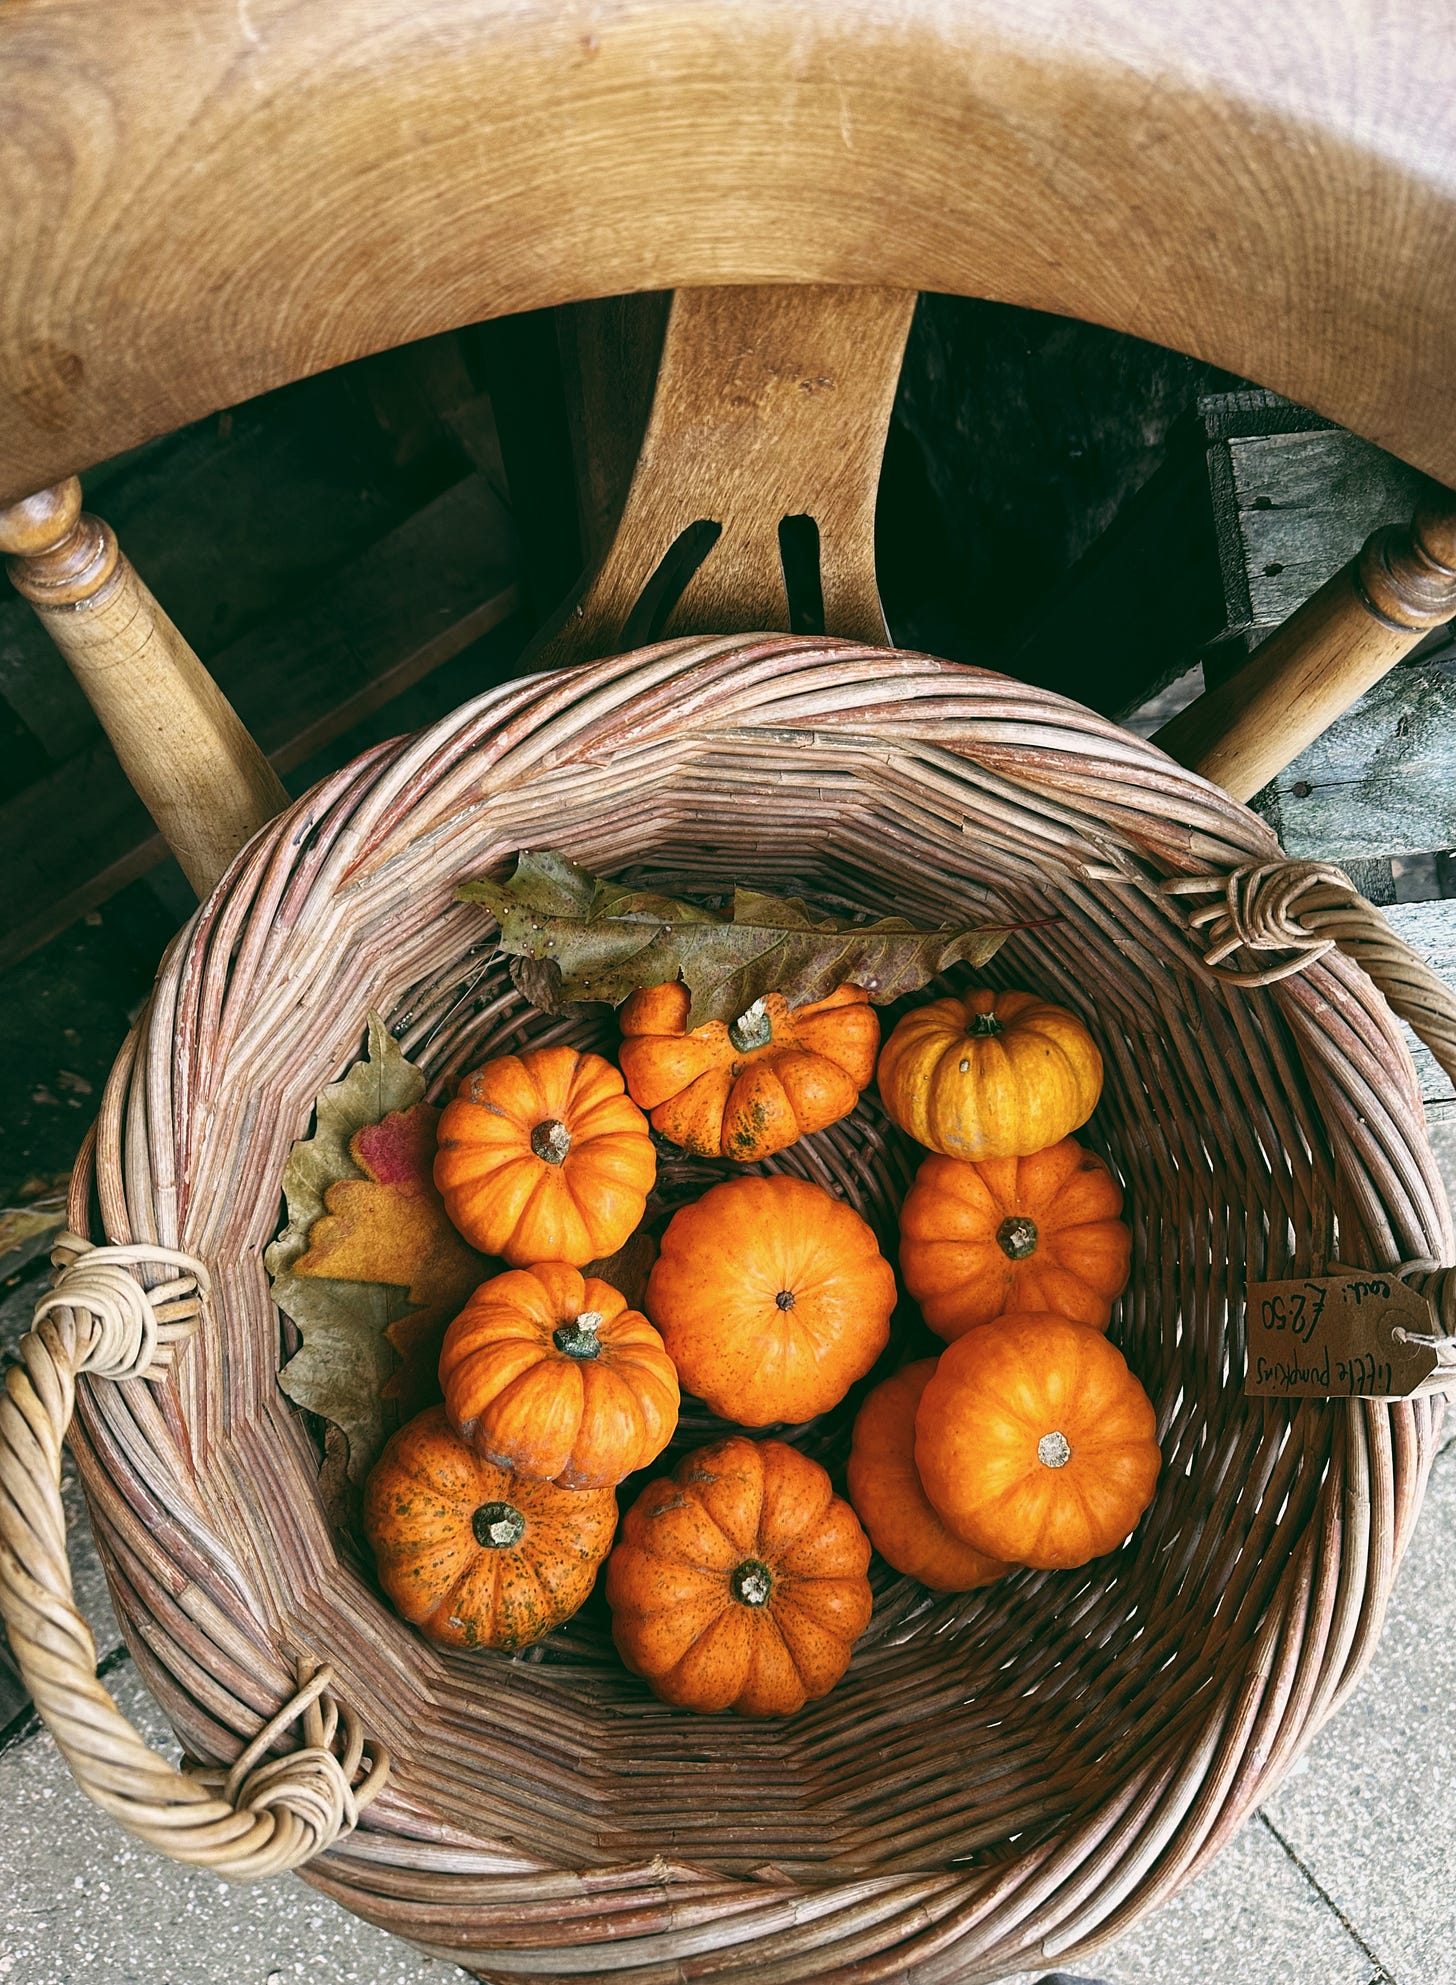 looking down into a wicker basket filled with mini orange pumpkins and autumn leaves. The basket sits on a wooden chair.